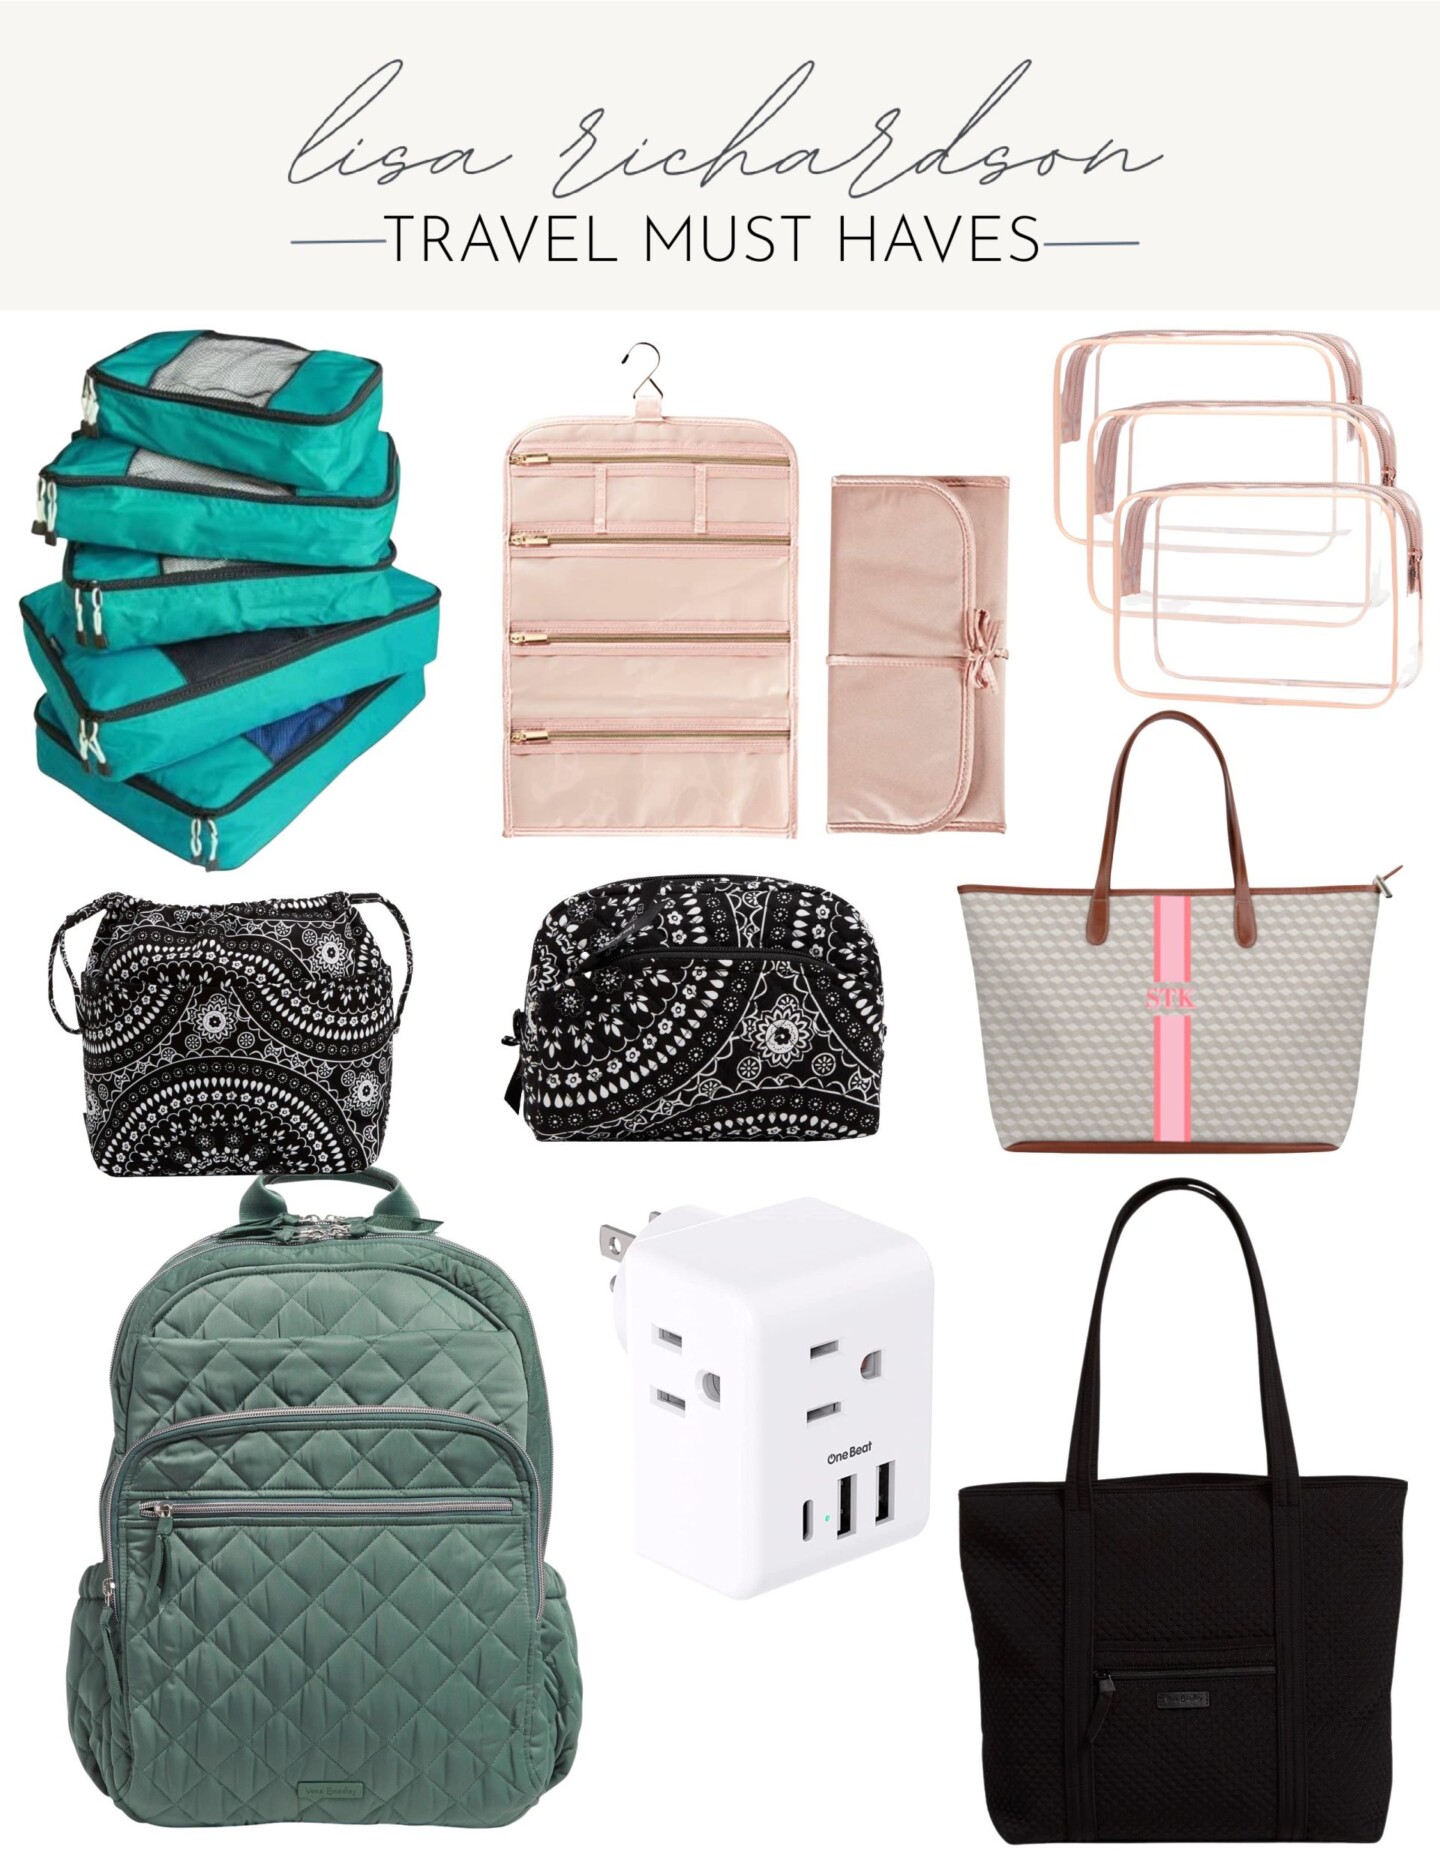 TRAVEL MUST HAVES